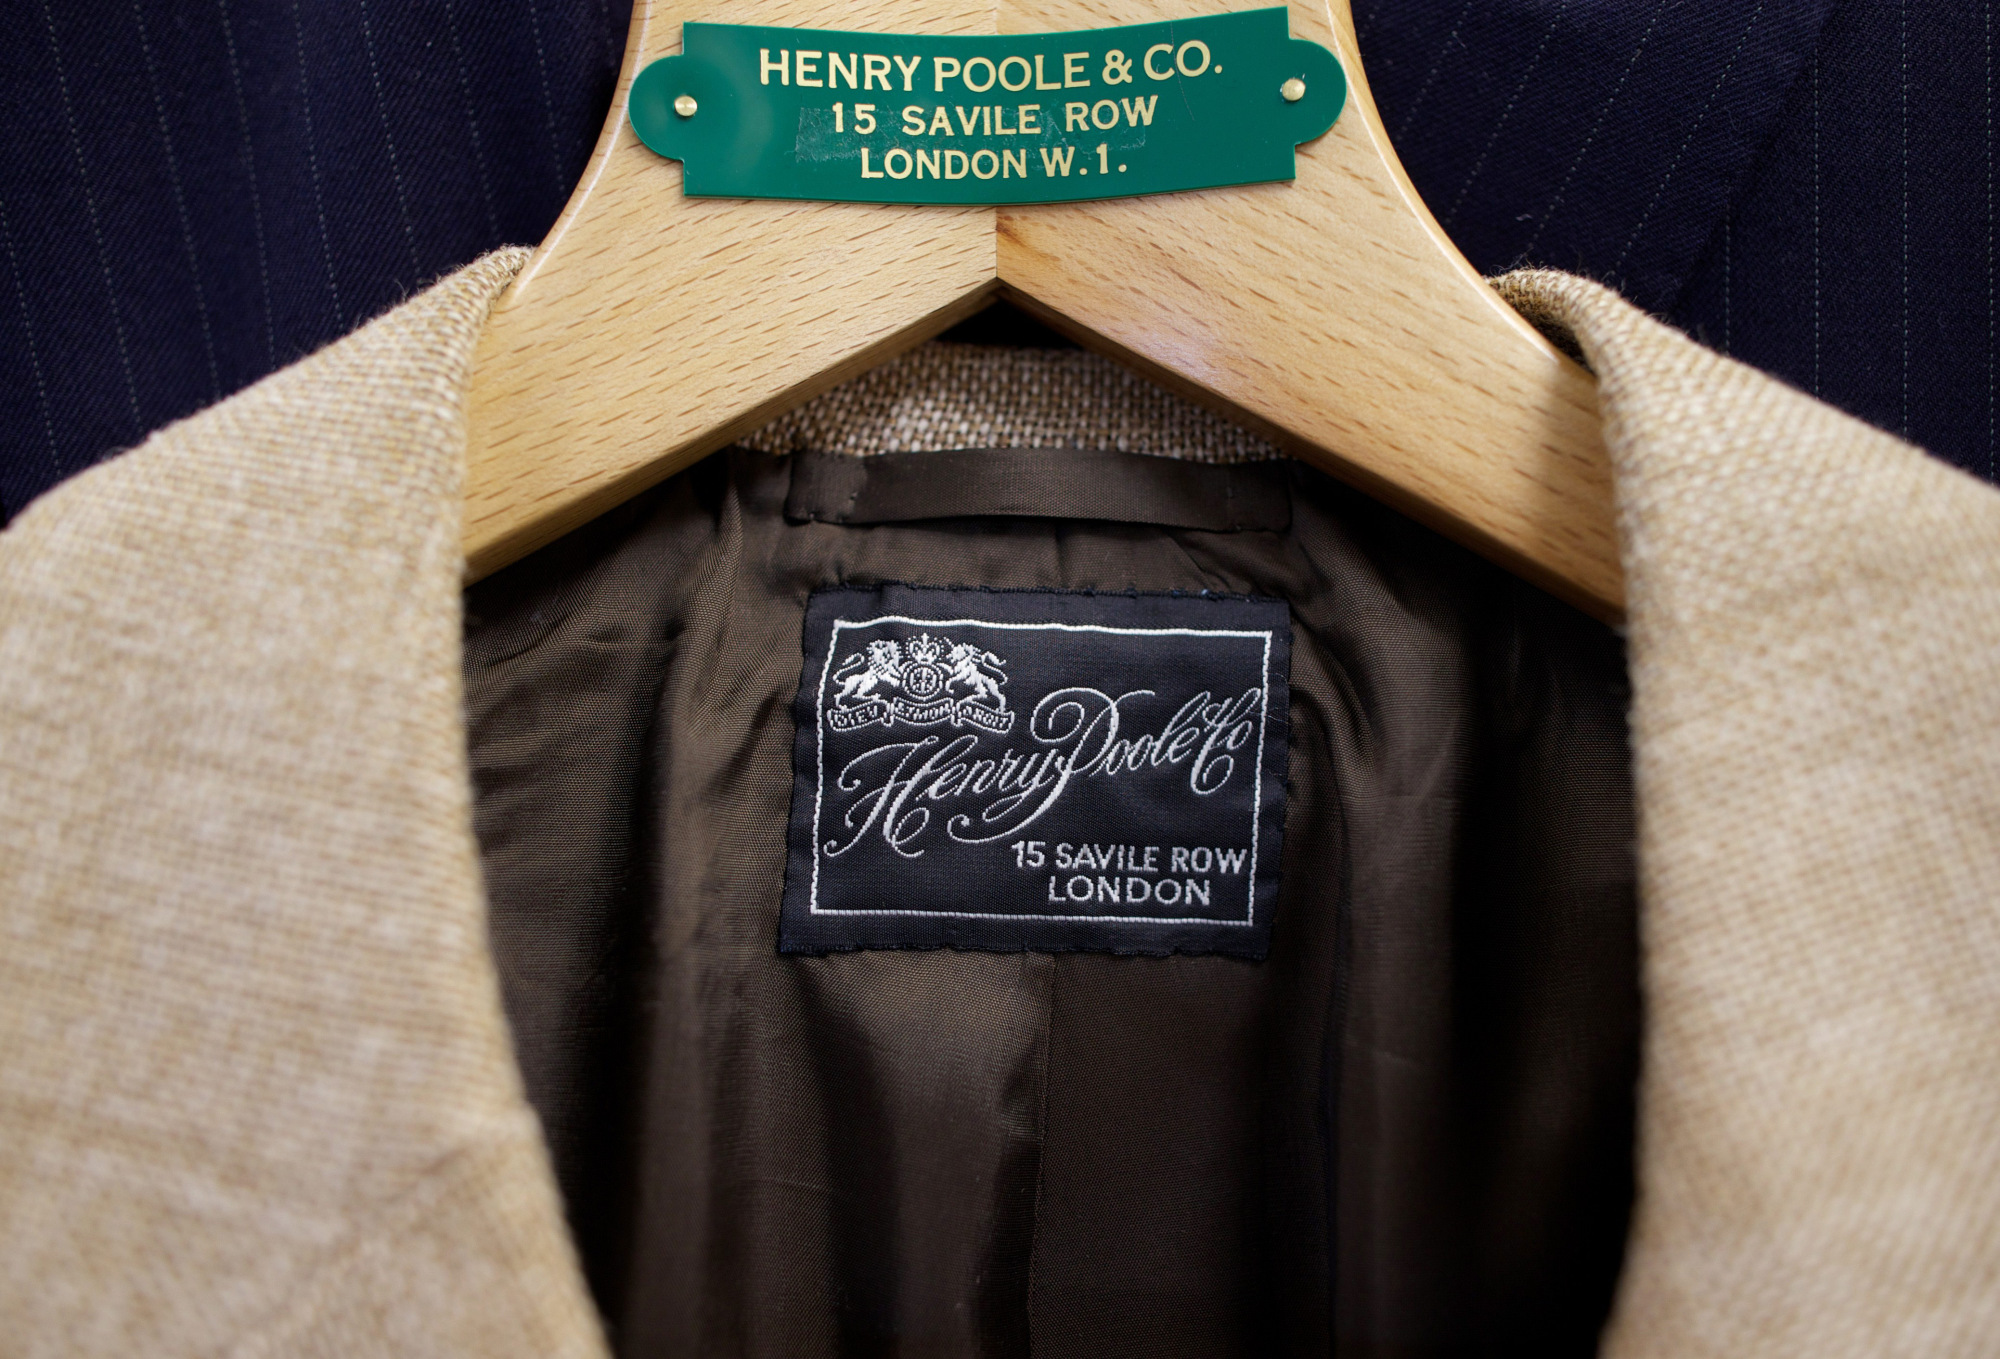 Here's why you will pay £3,000 to £4,000 for a Savile Row suit? - PEAKLIFE